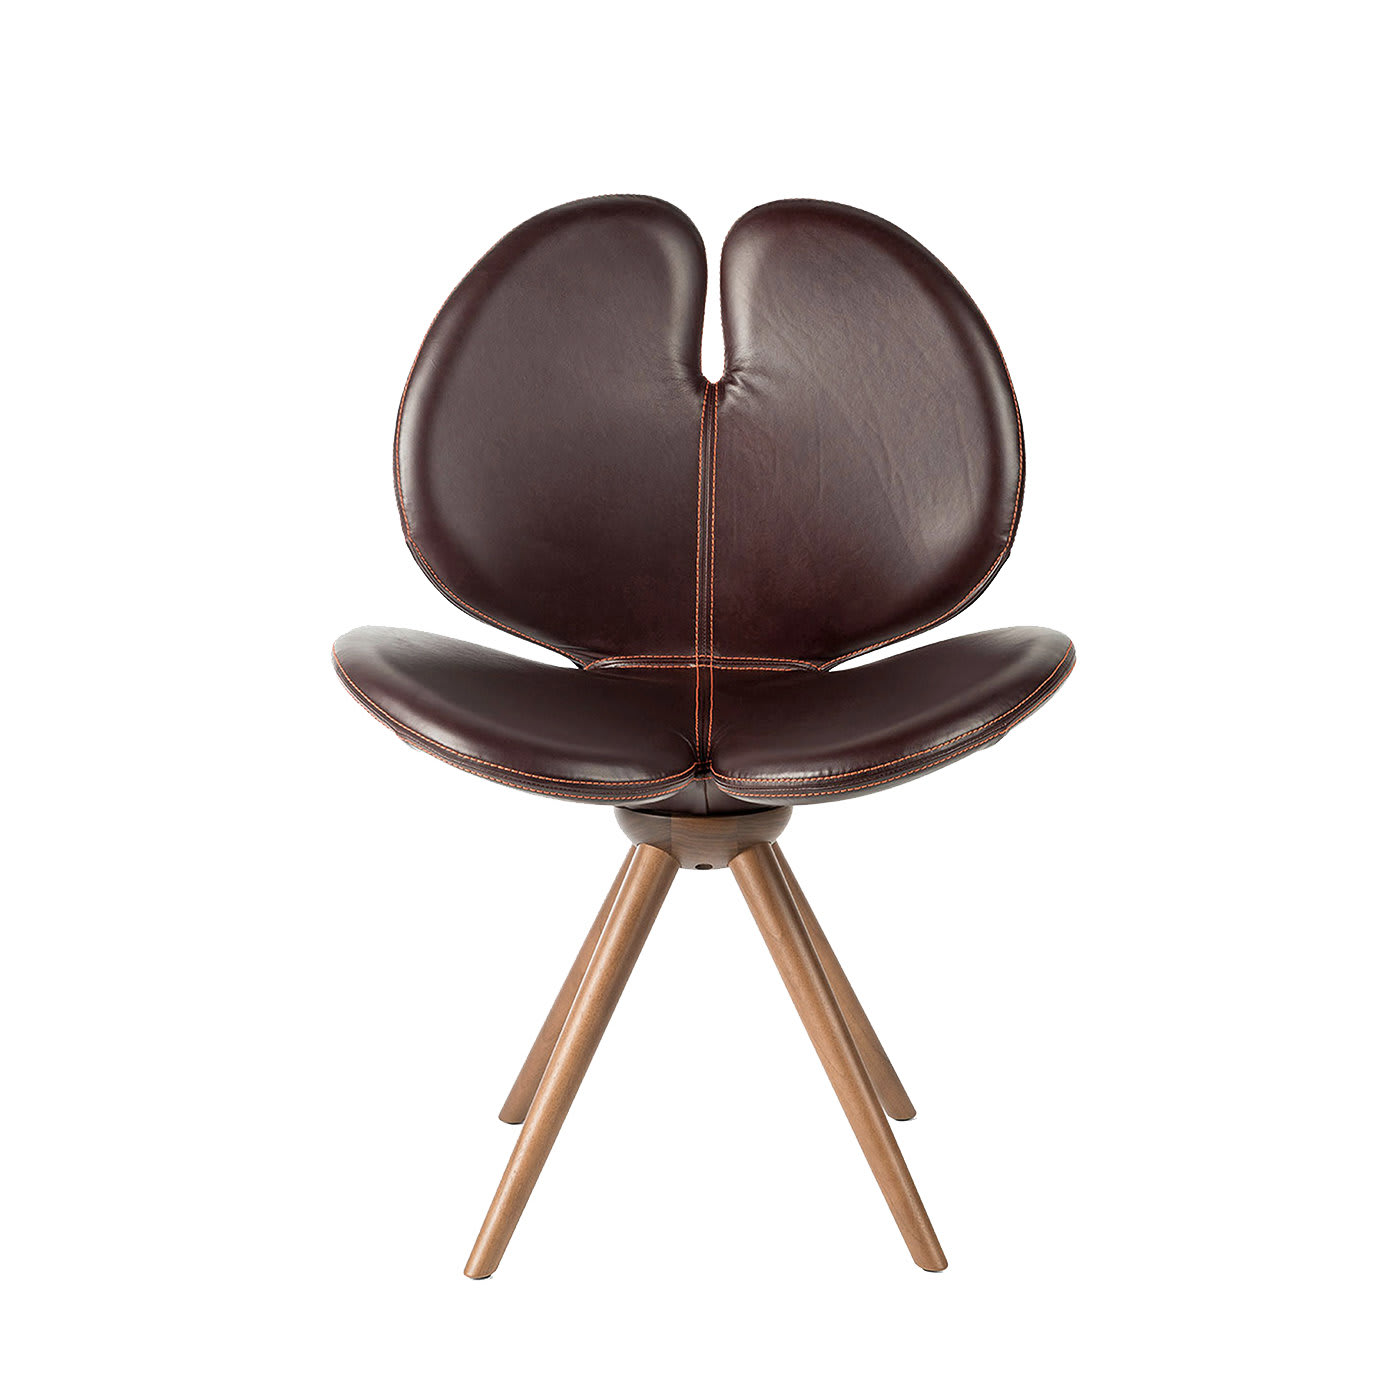 New Pansè Leather and Wood Chair - VGnewtrend